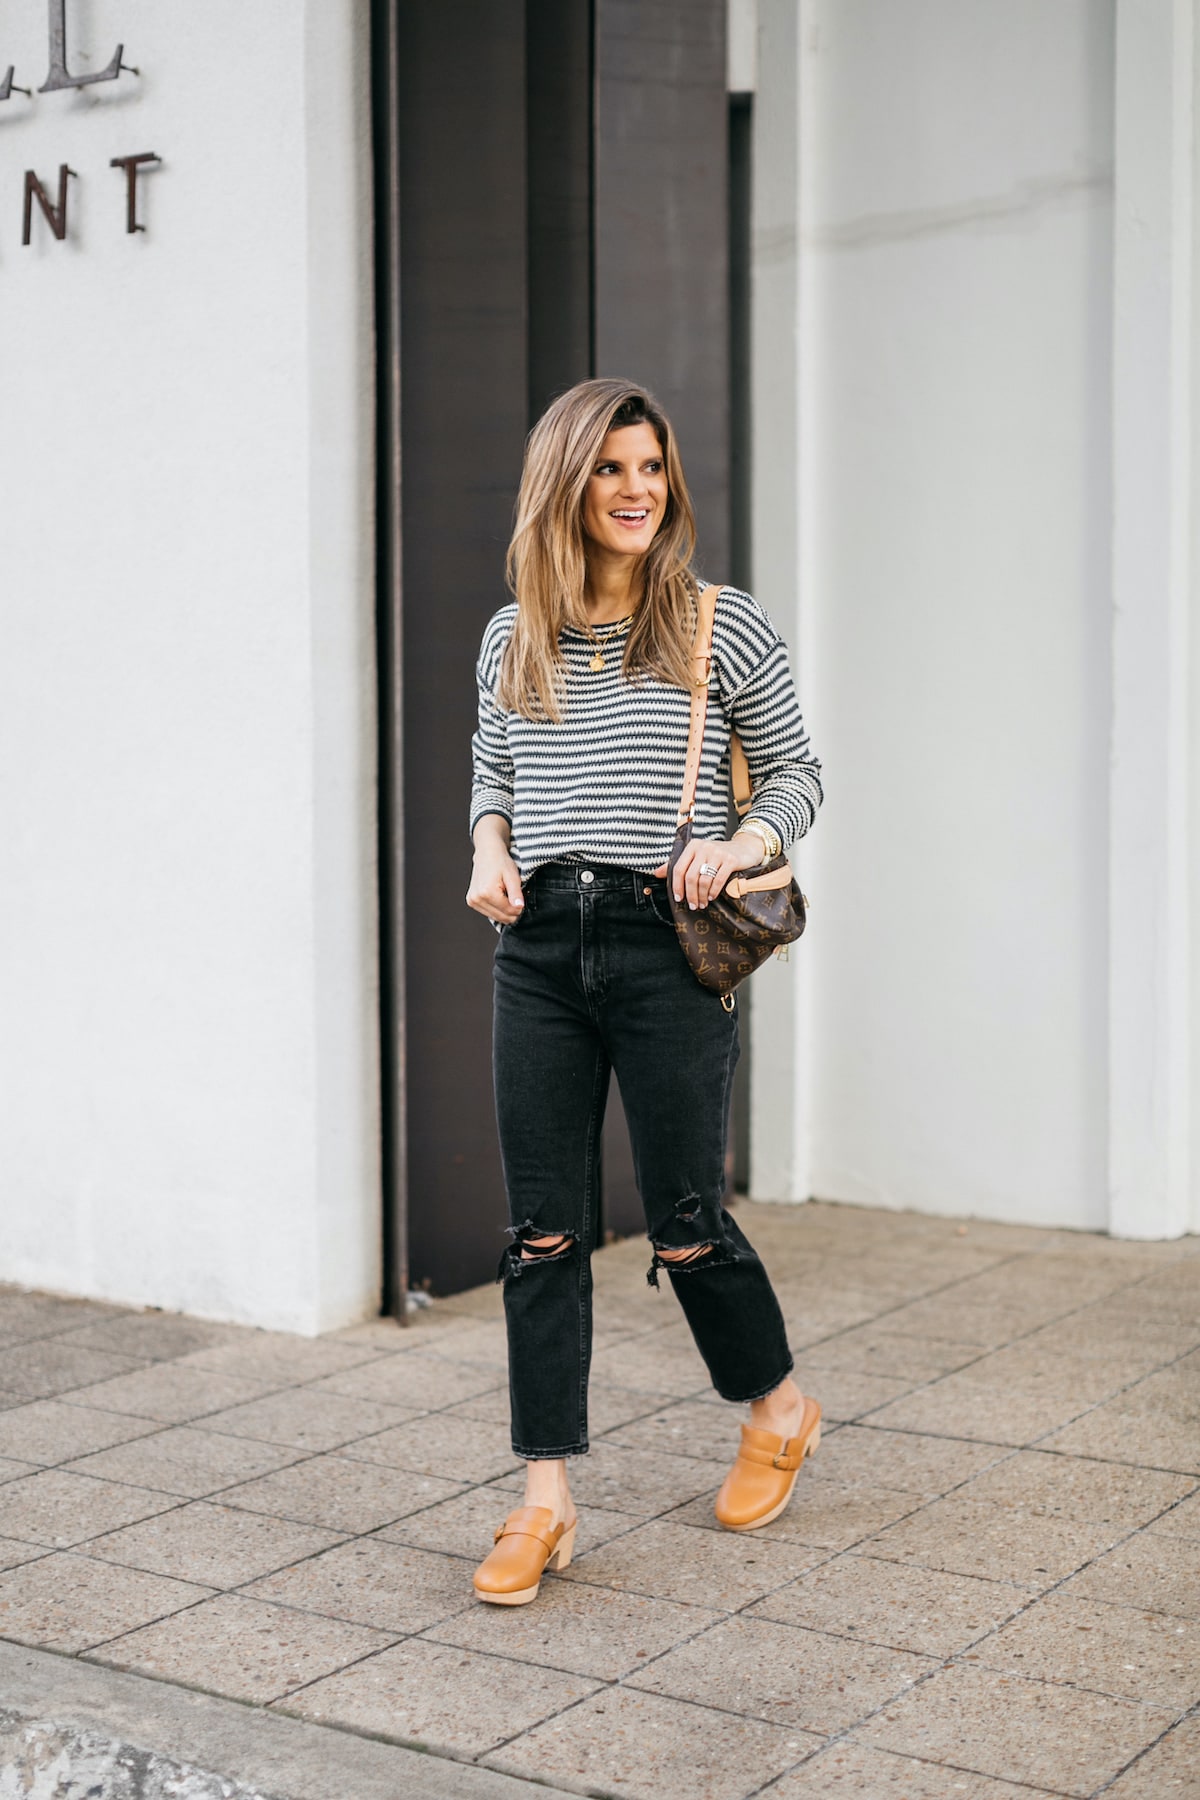 Brighton Butler wearing madewell clogs, striped sweater, black abercrombie jeans and bumbag